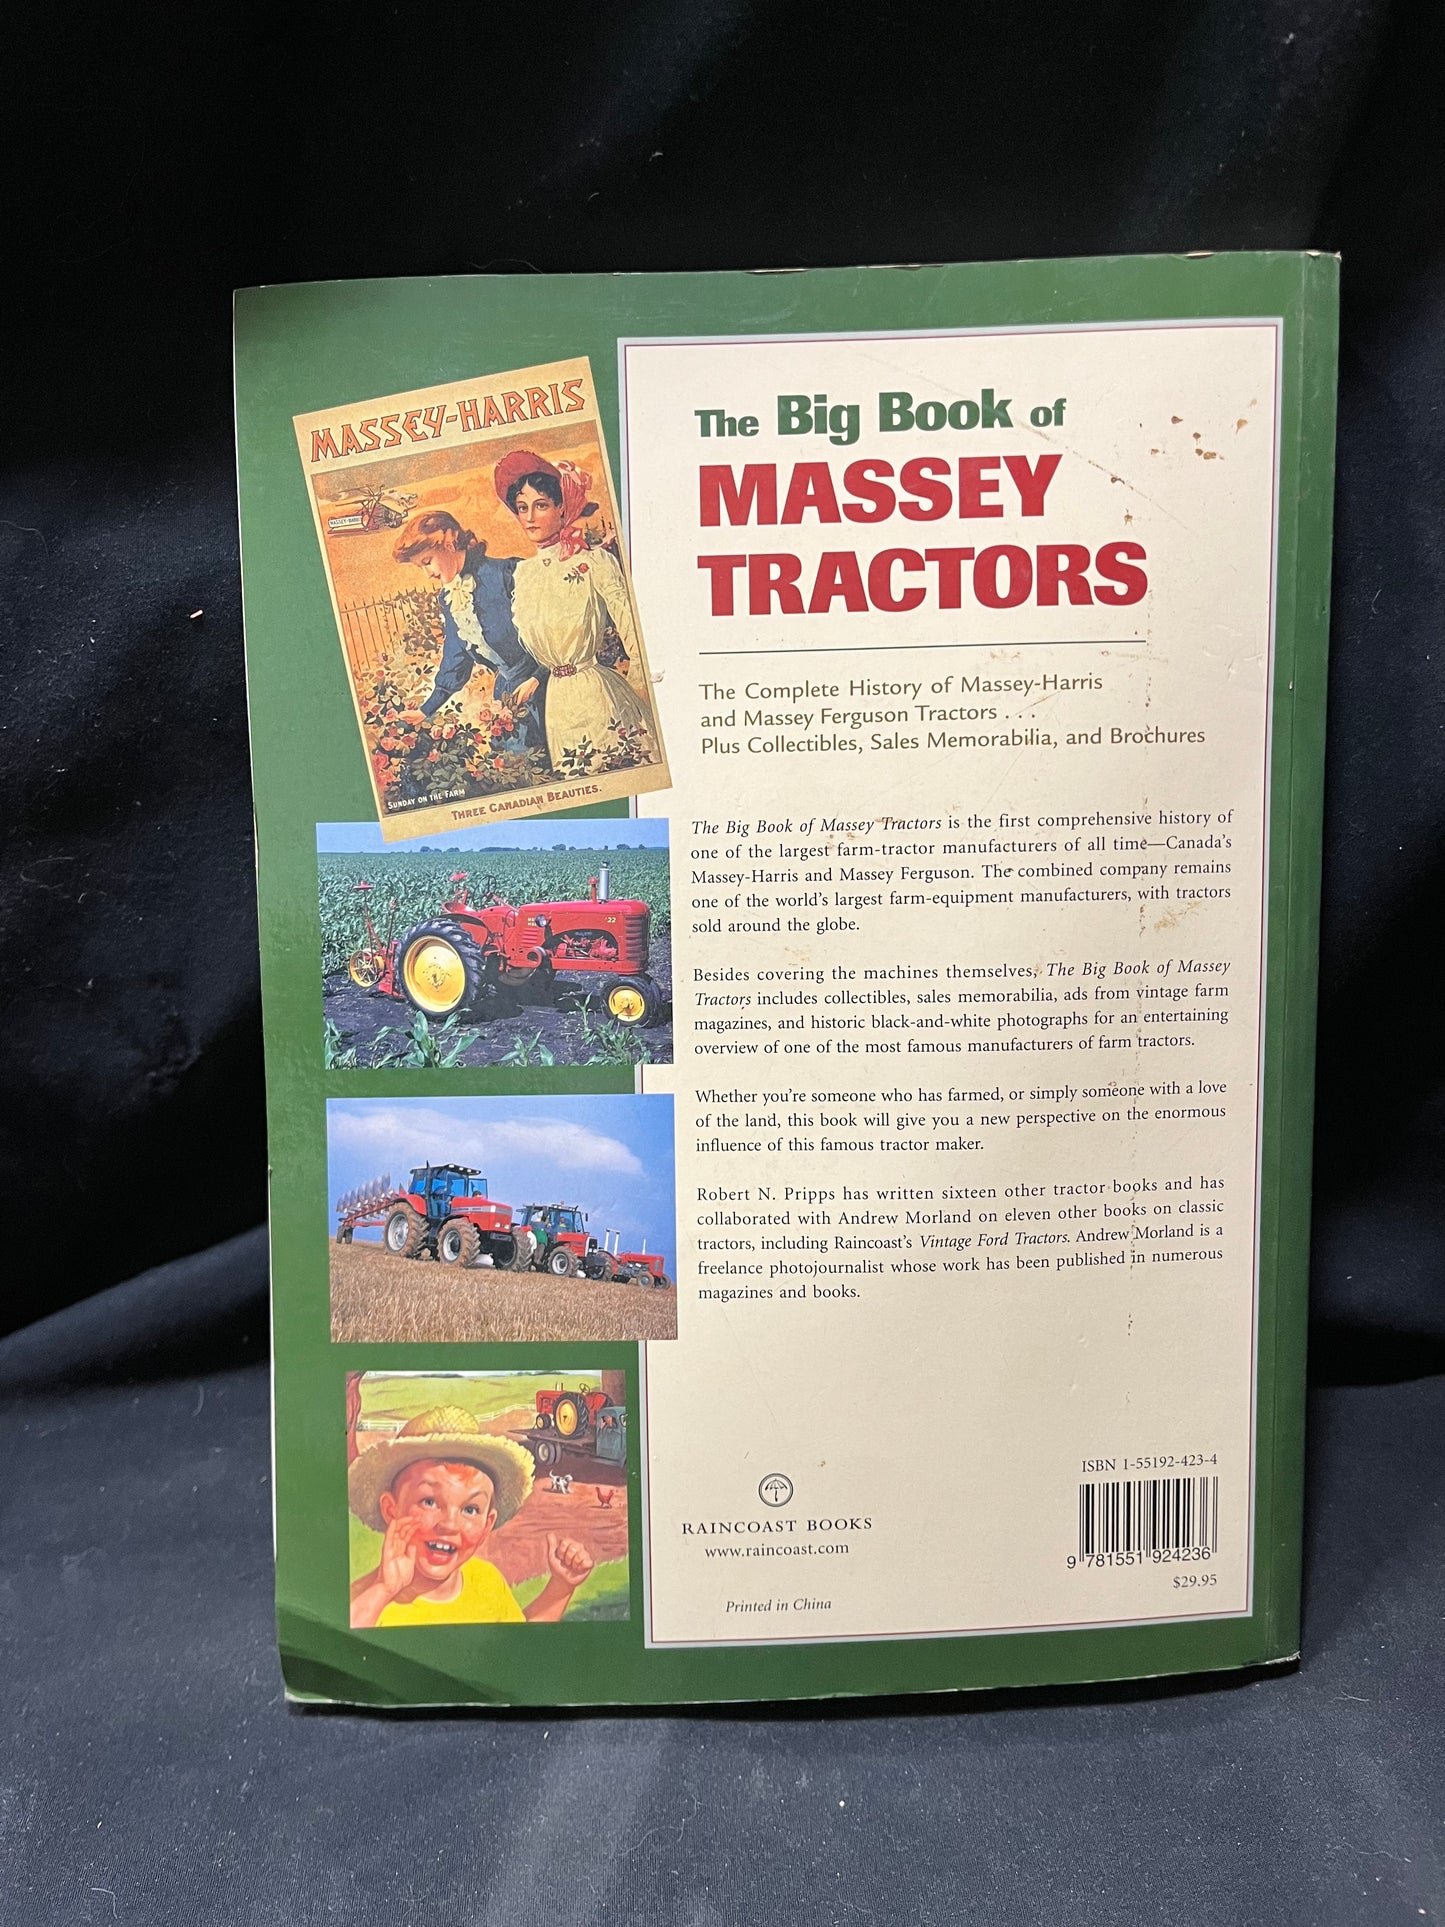 The Big Book of Massey Tractors - Complete History